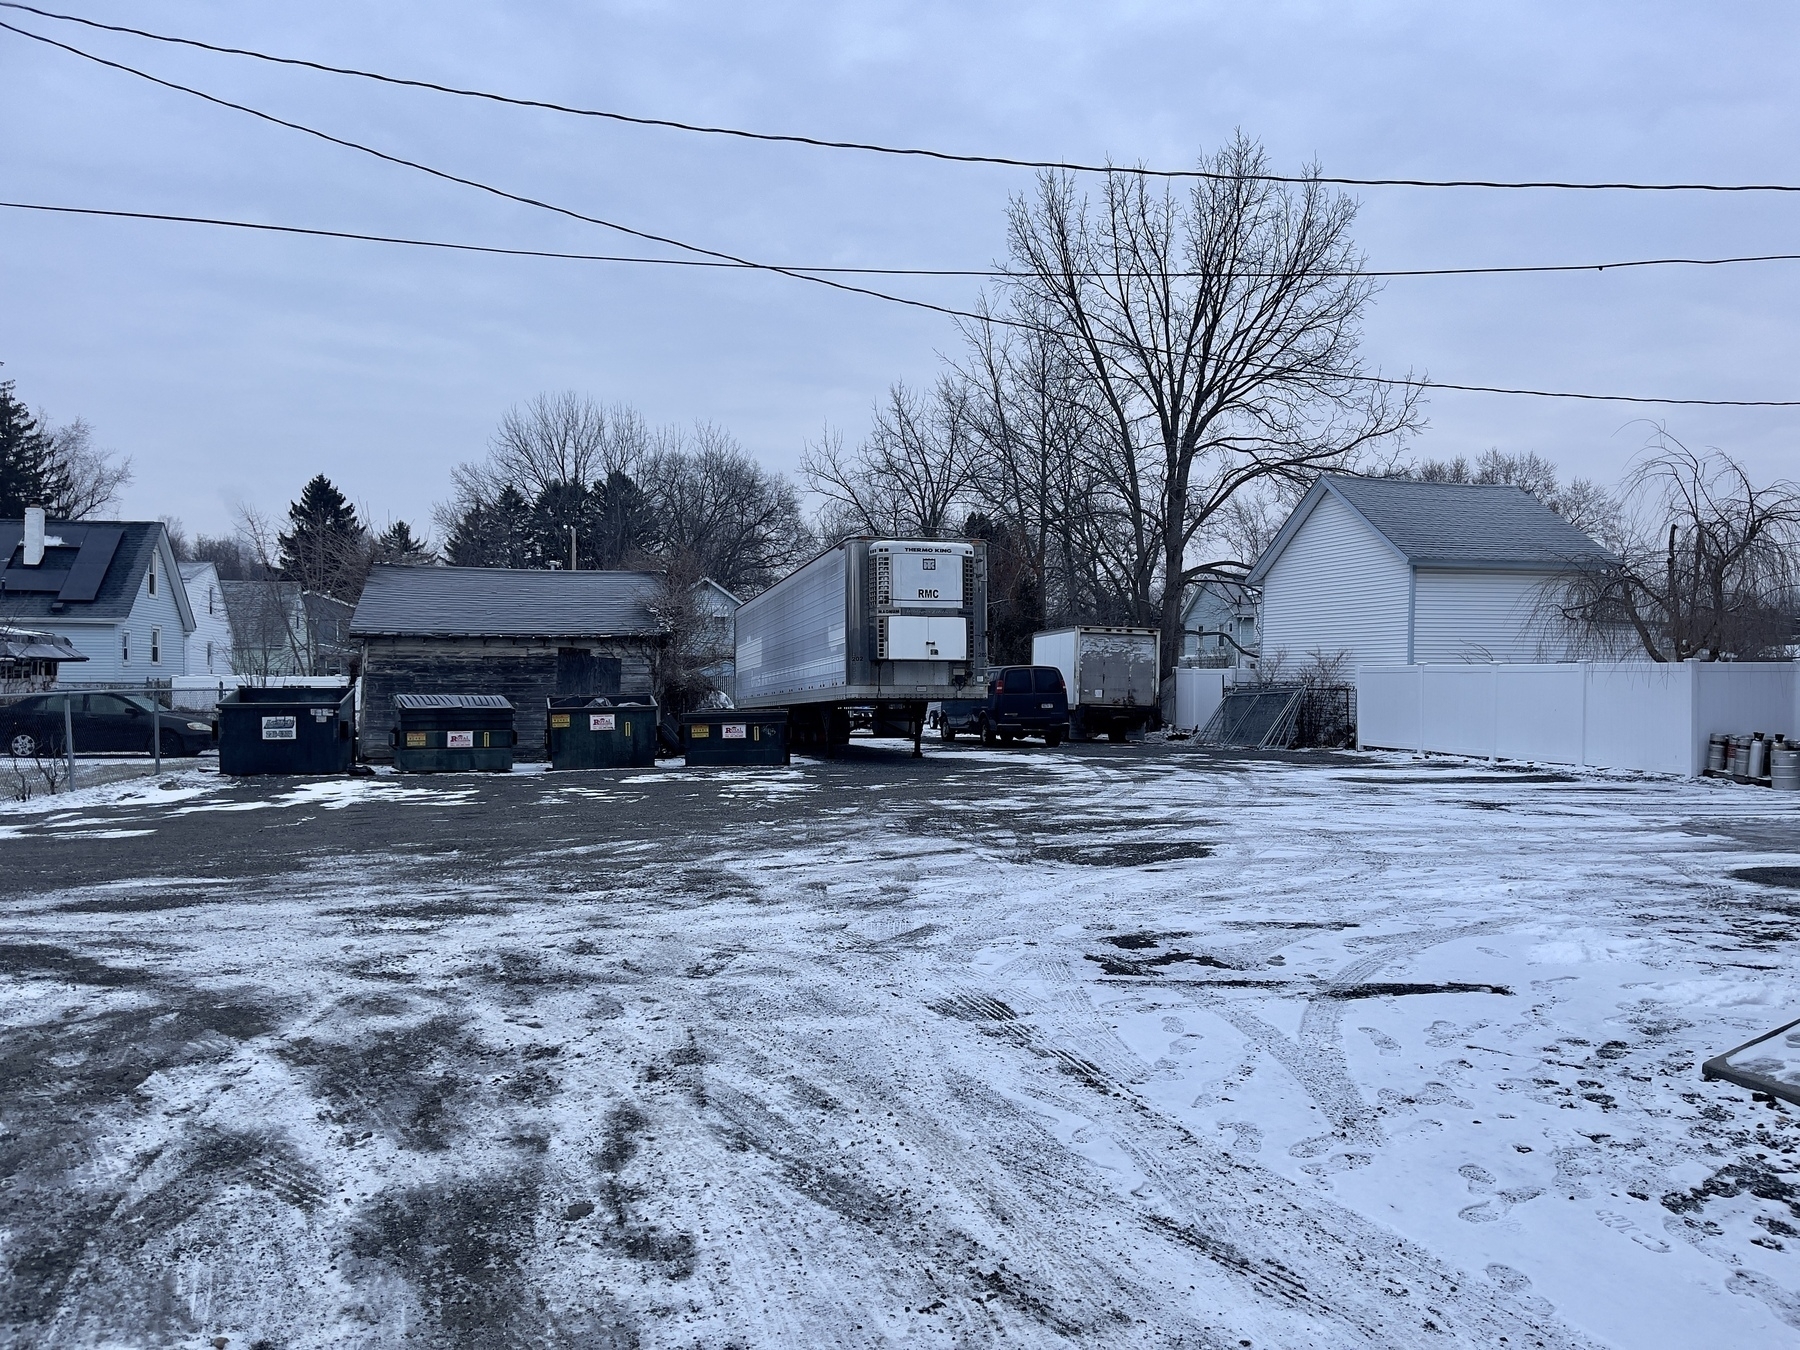 Parking lot wit small garage structures, garbage bins, truck and trailer.